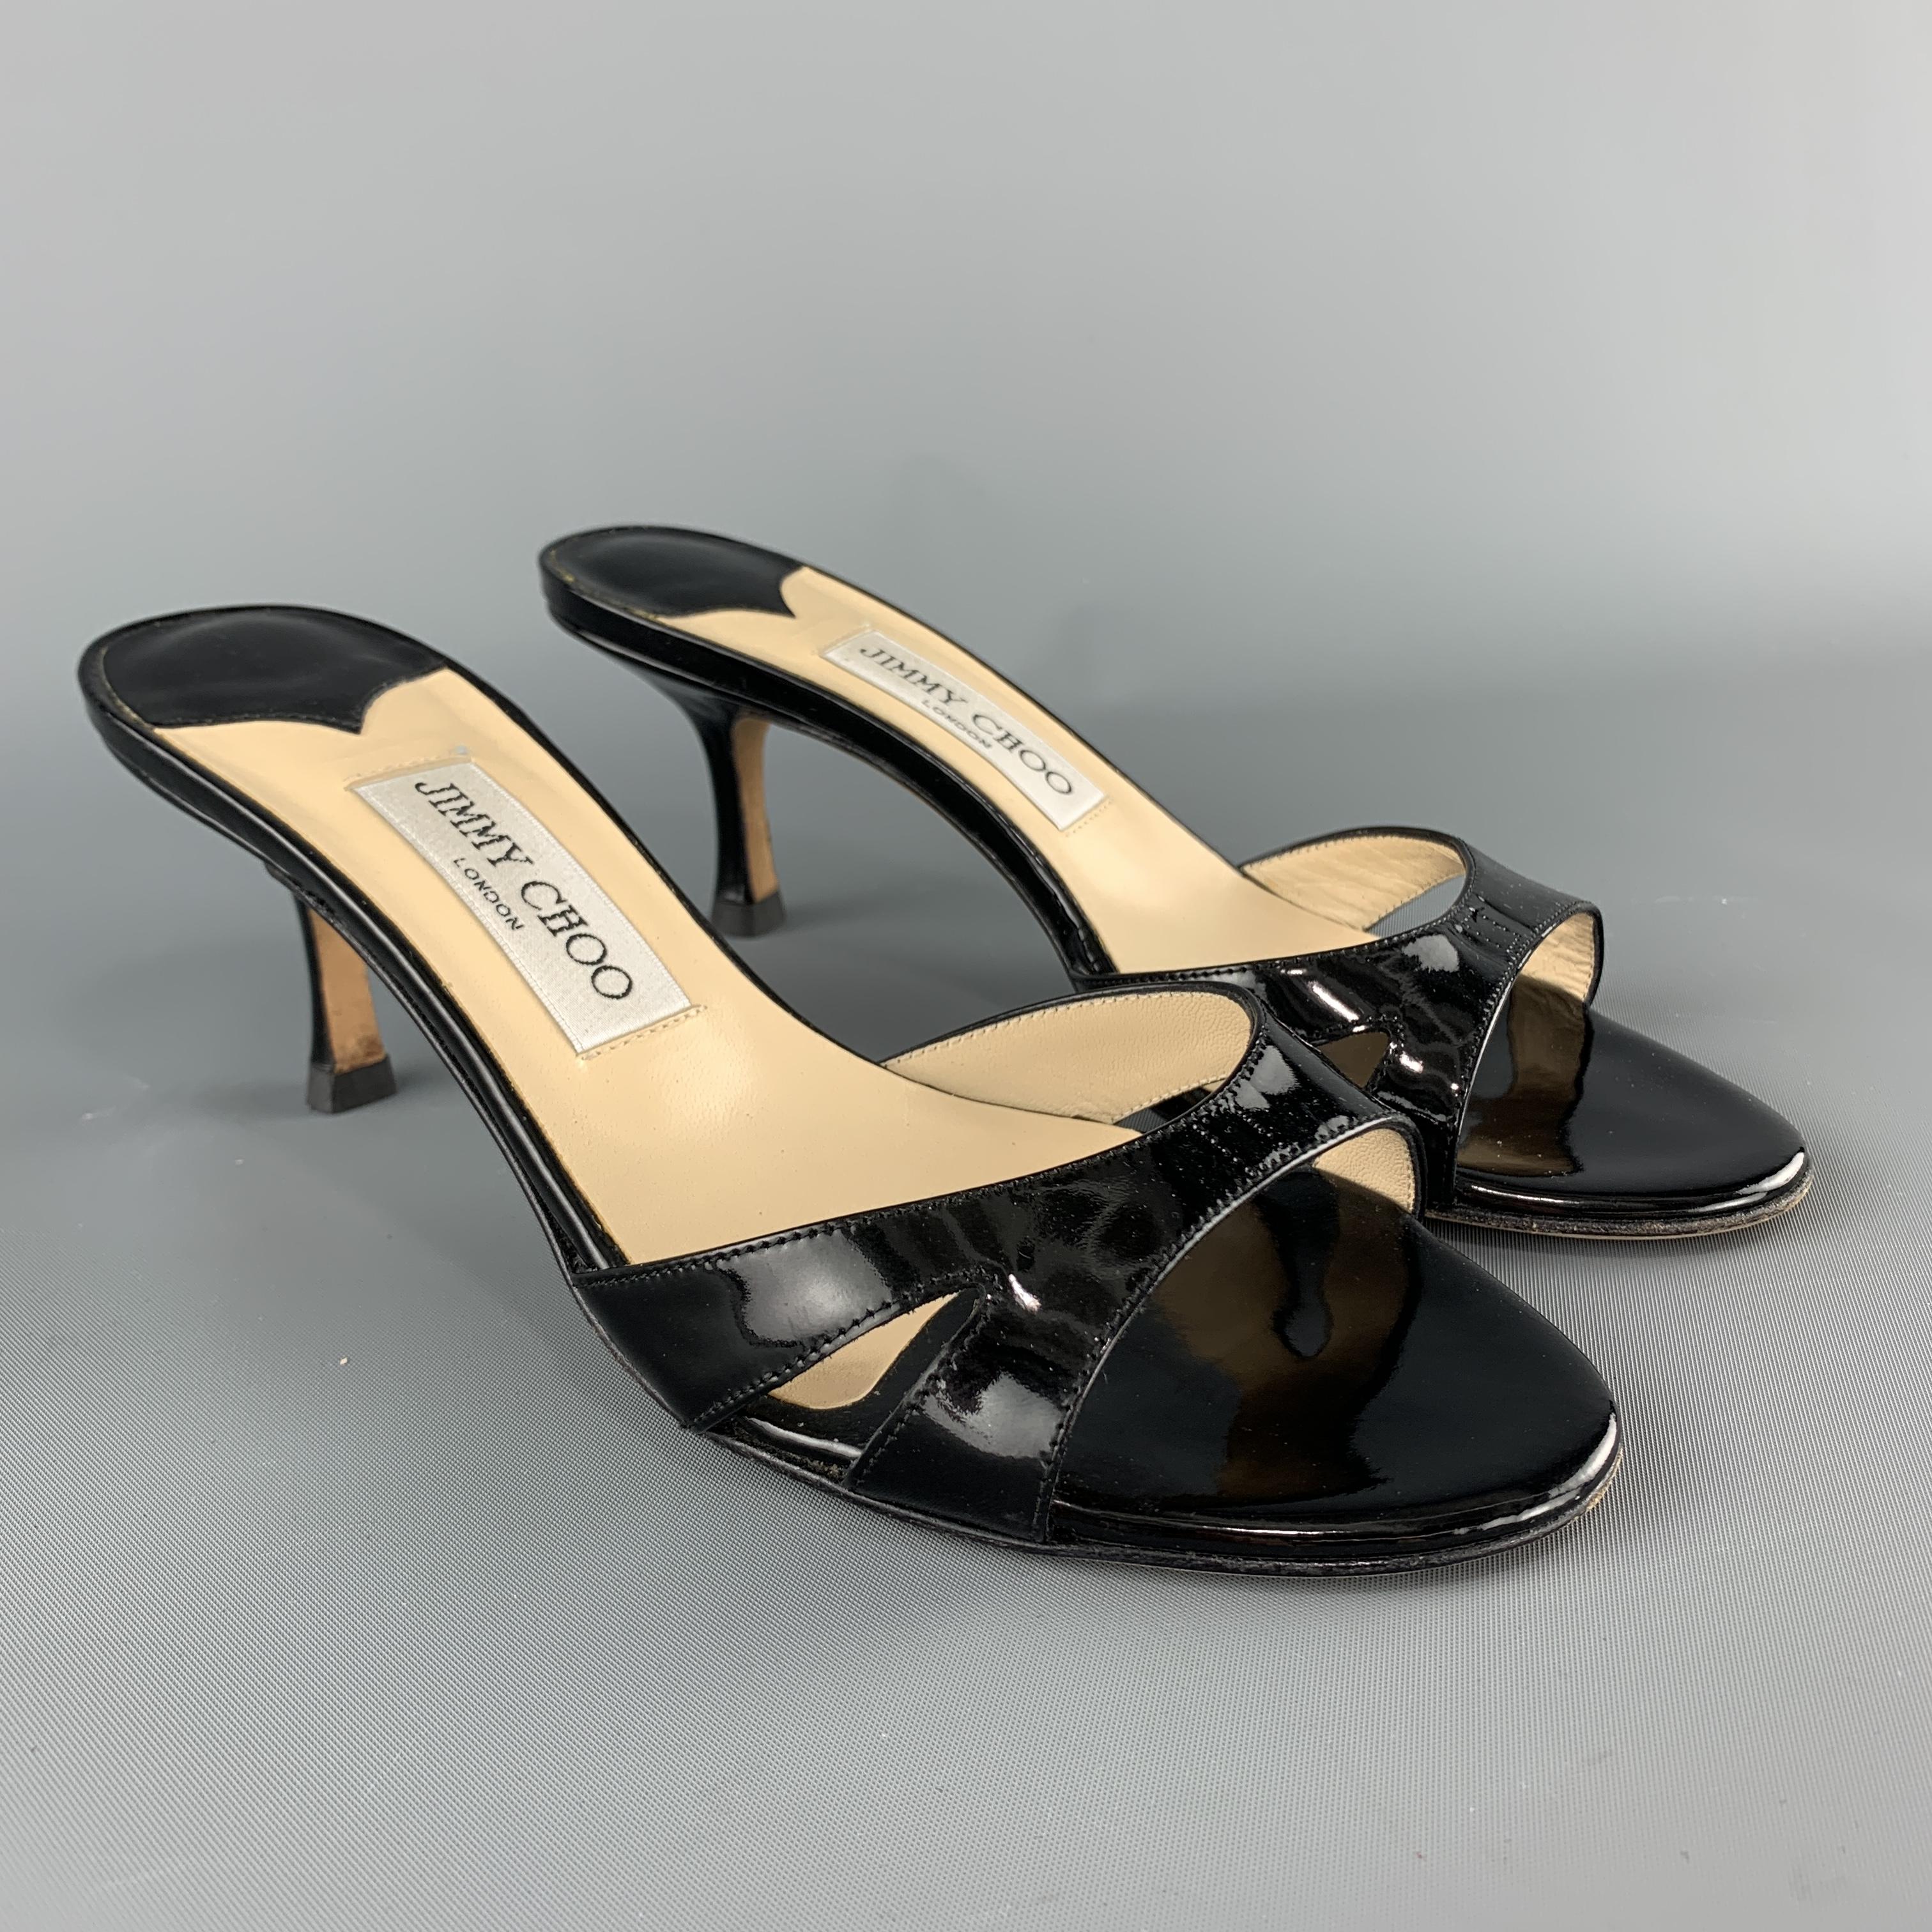 JIMMY CHOO mule sandals com ein black patent leather with cutout strap and lacquered heel. ade in Italy.

Excellent Pre-Owned Condition.
Marked: IT 37.5

Heel: 3 in.  